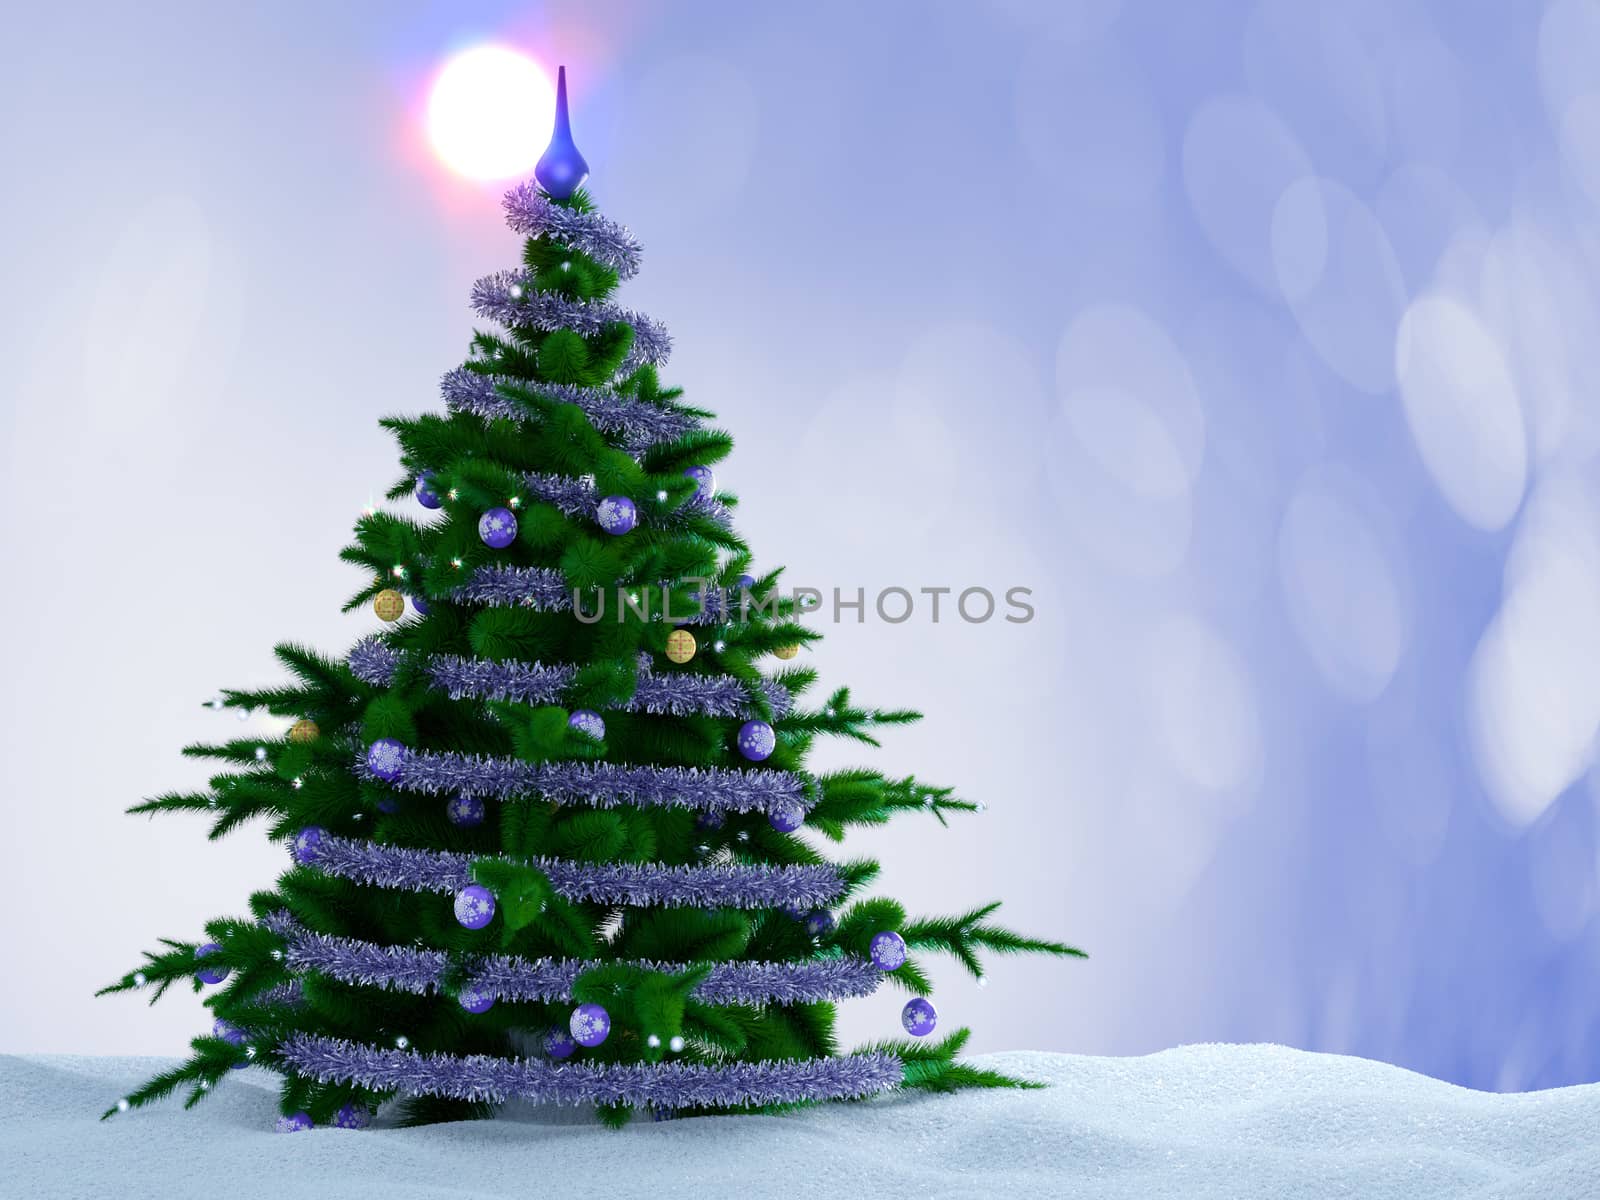 Christmas tree with decorations and snow on decorative background. by denisgo